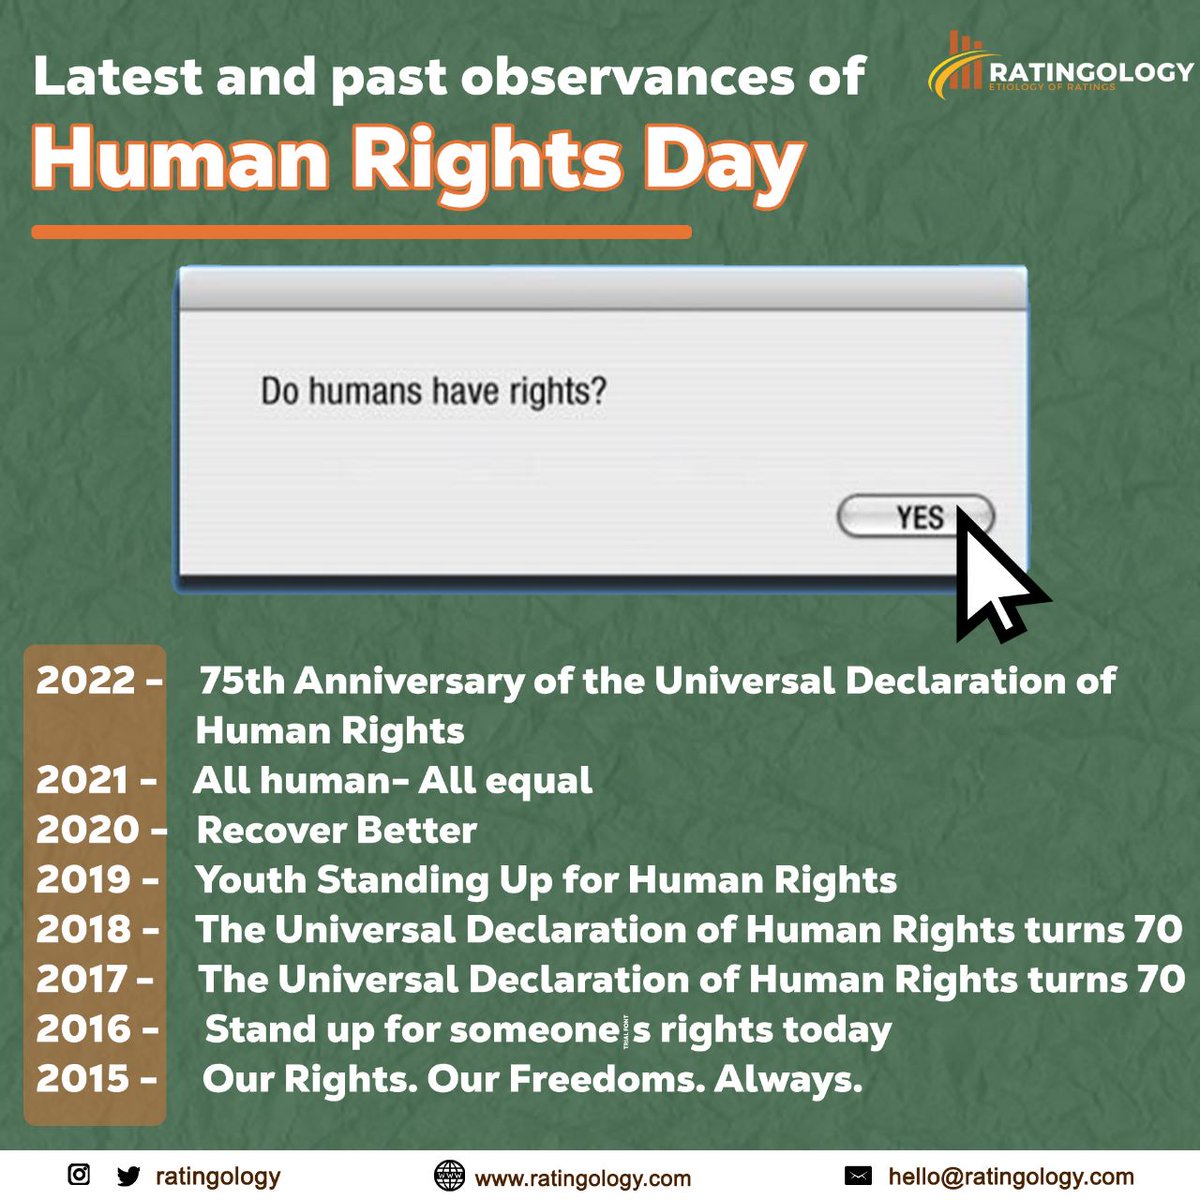 Human Rights Day is observed by the international community every year on 10 December. It commemorates the day in 1948 the United Nations General Assembly adopted the Universal Declaration of Human Rights.

#WorldHumanRightsDay #Ratingology #WorldHumanRightsDay_2022